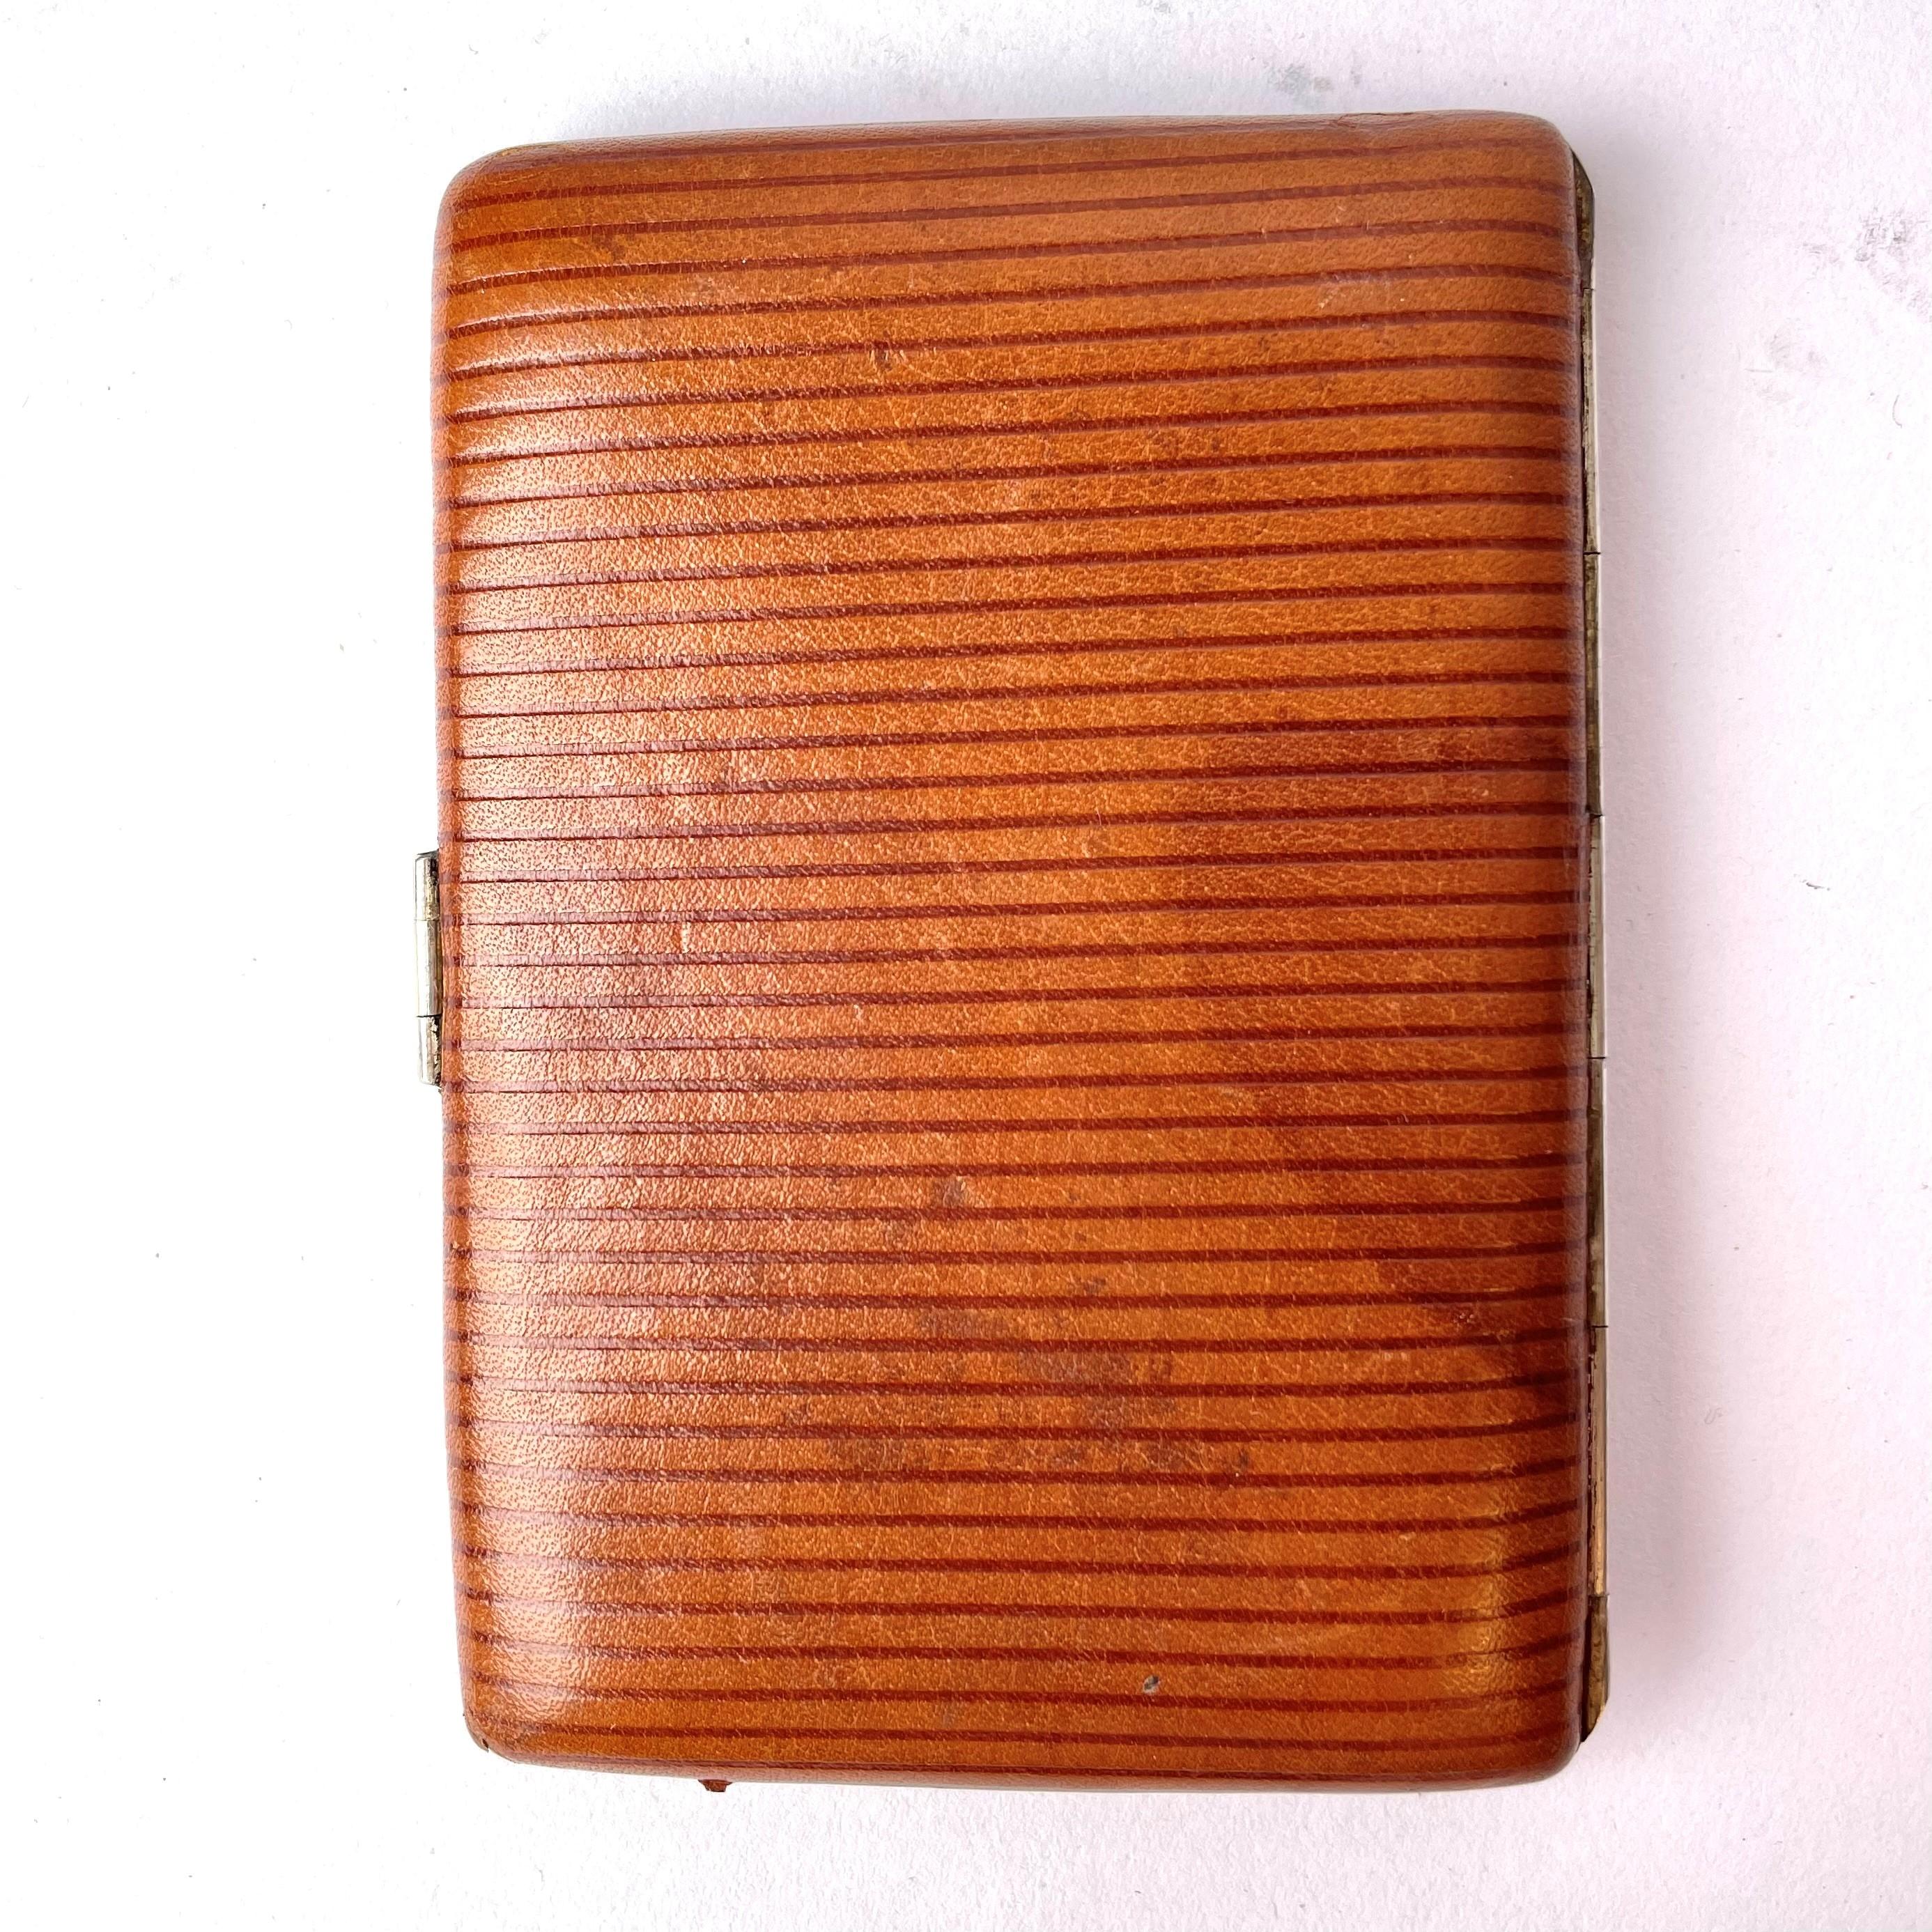 European Business Card Case / Purse in leather with silver details, late 19th Century For Sale